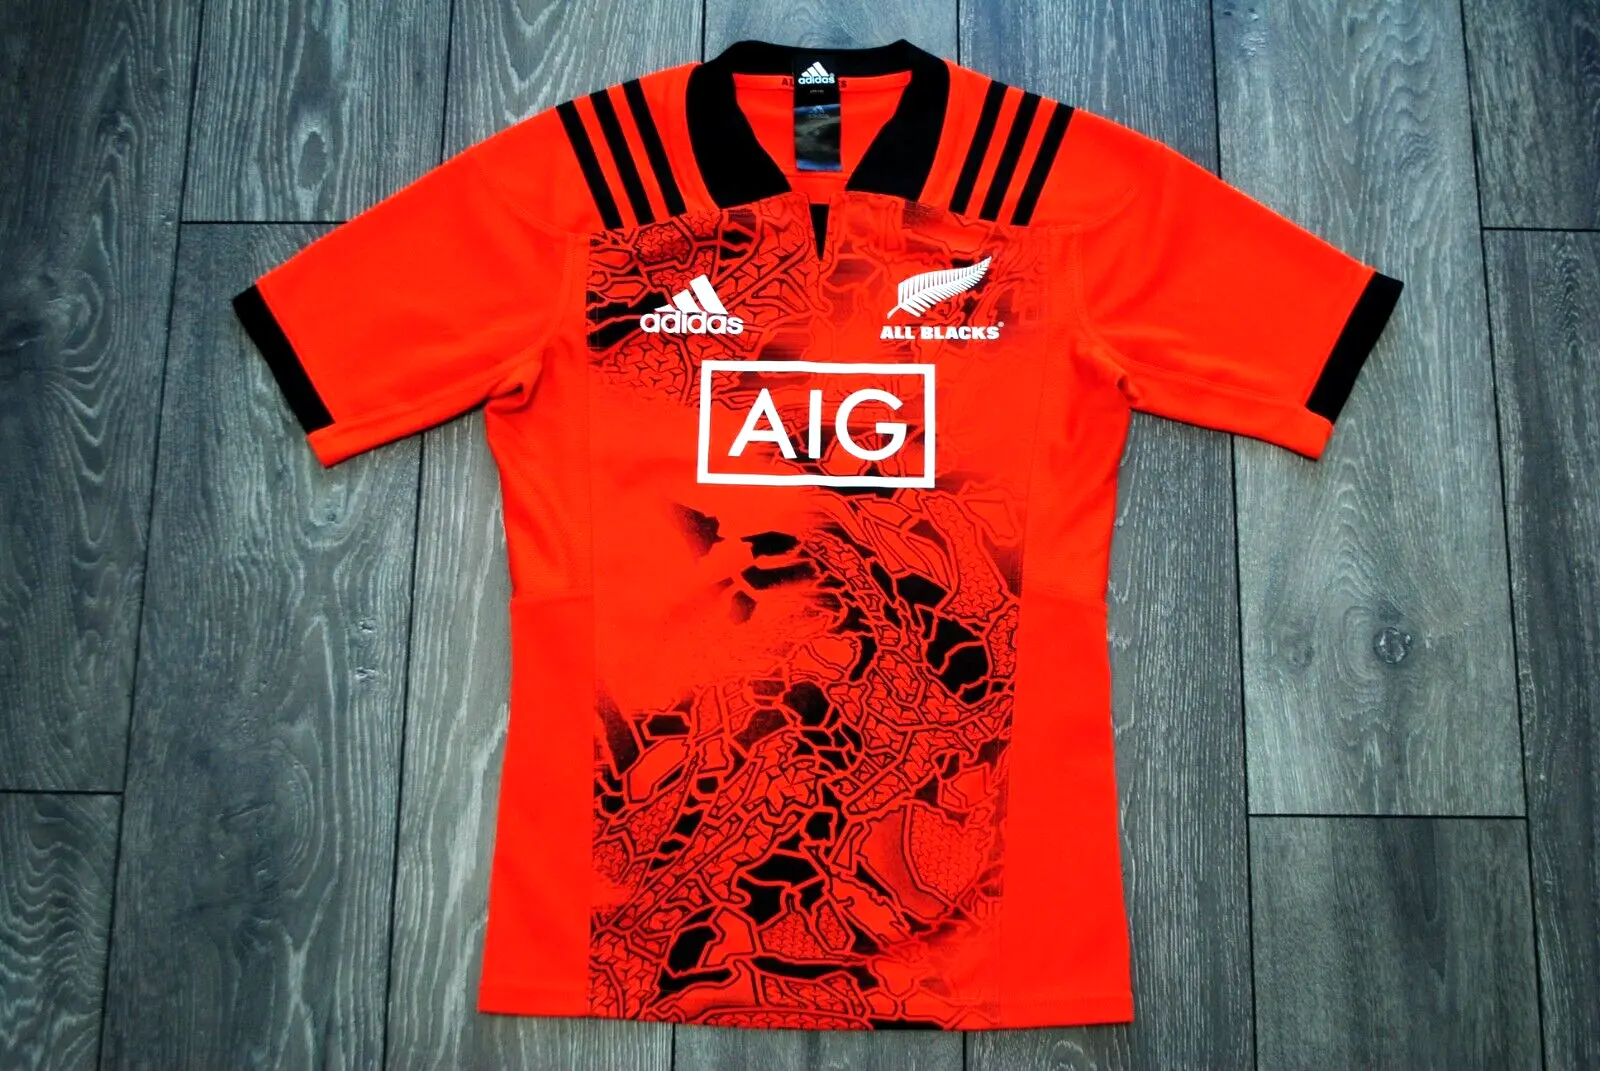 ALL BLACKS NEW ZEALAND 2017 TRAINING RUGBY UNION SHIRT JERSEY RED ADIDAS MEN’S S